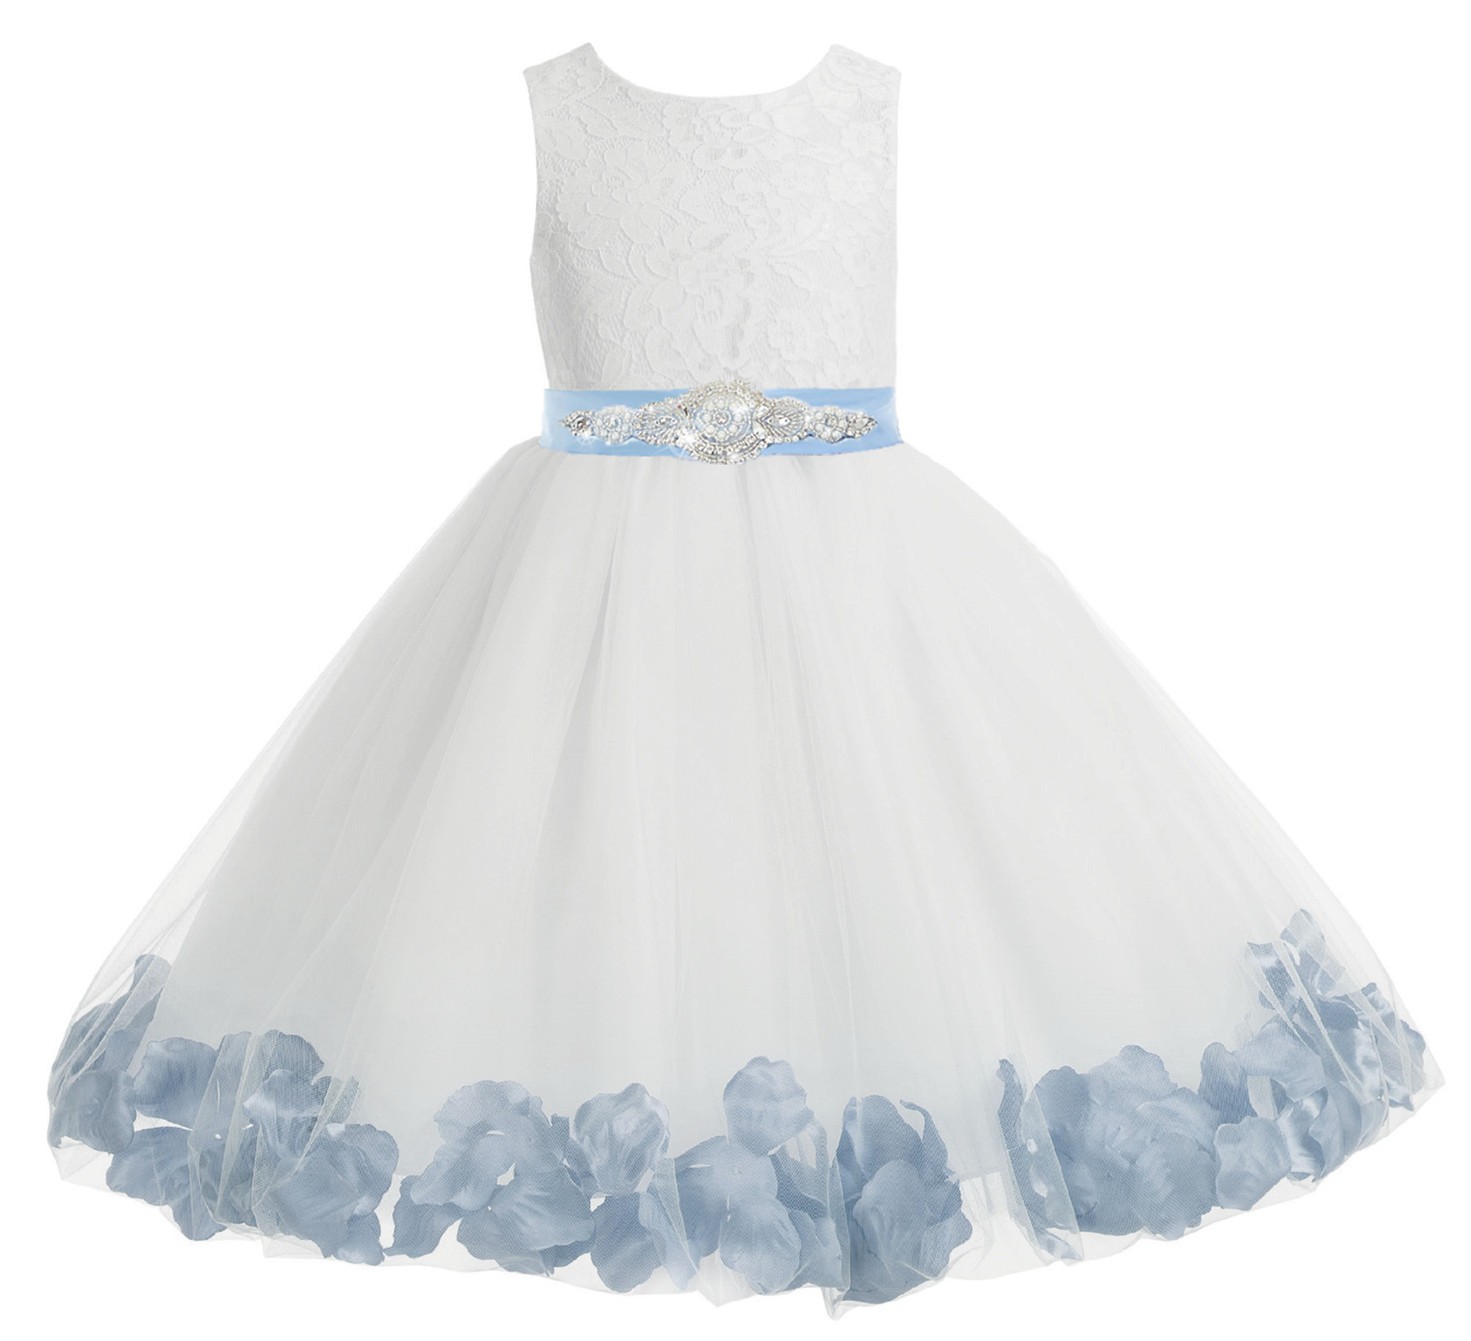 White / Dusty Blue Floral Lace Heart Cutout Flower Girl Dress with Petals 185